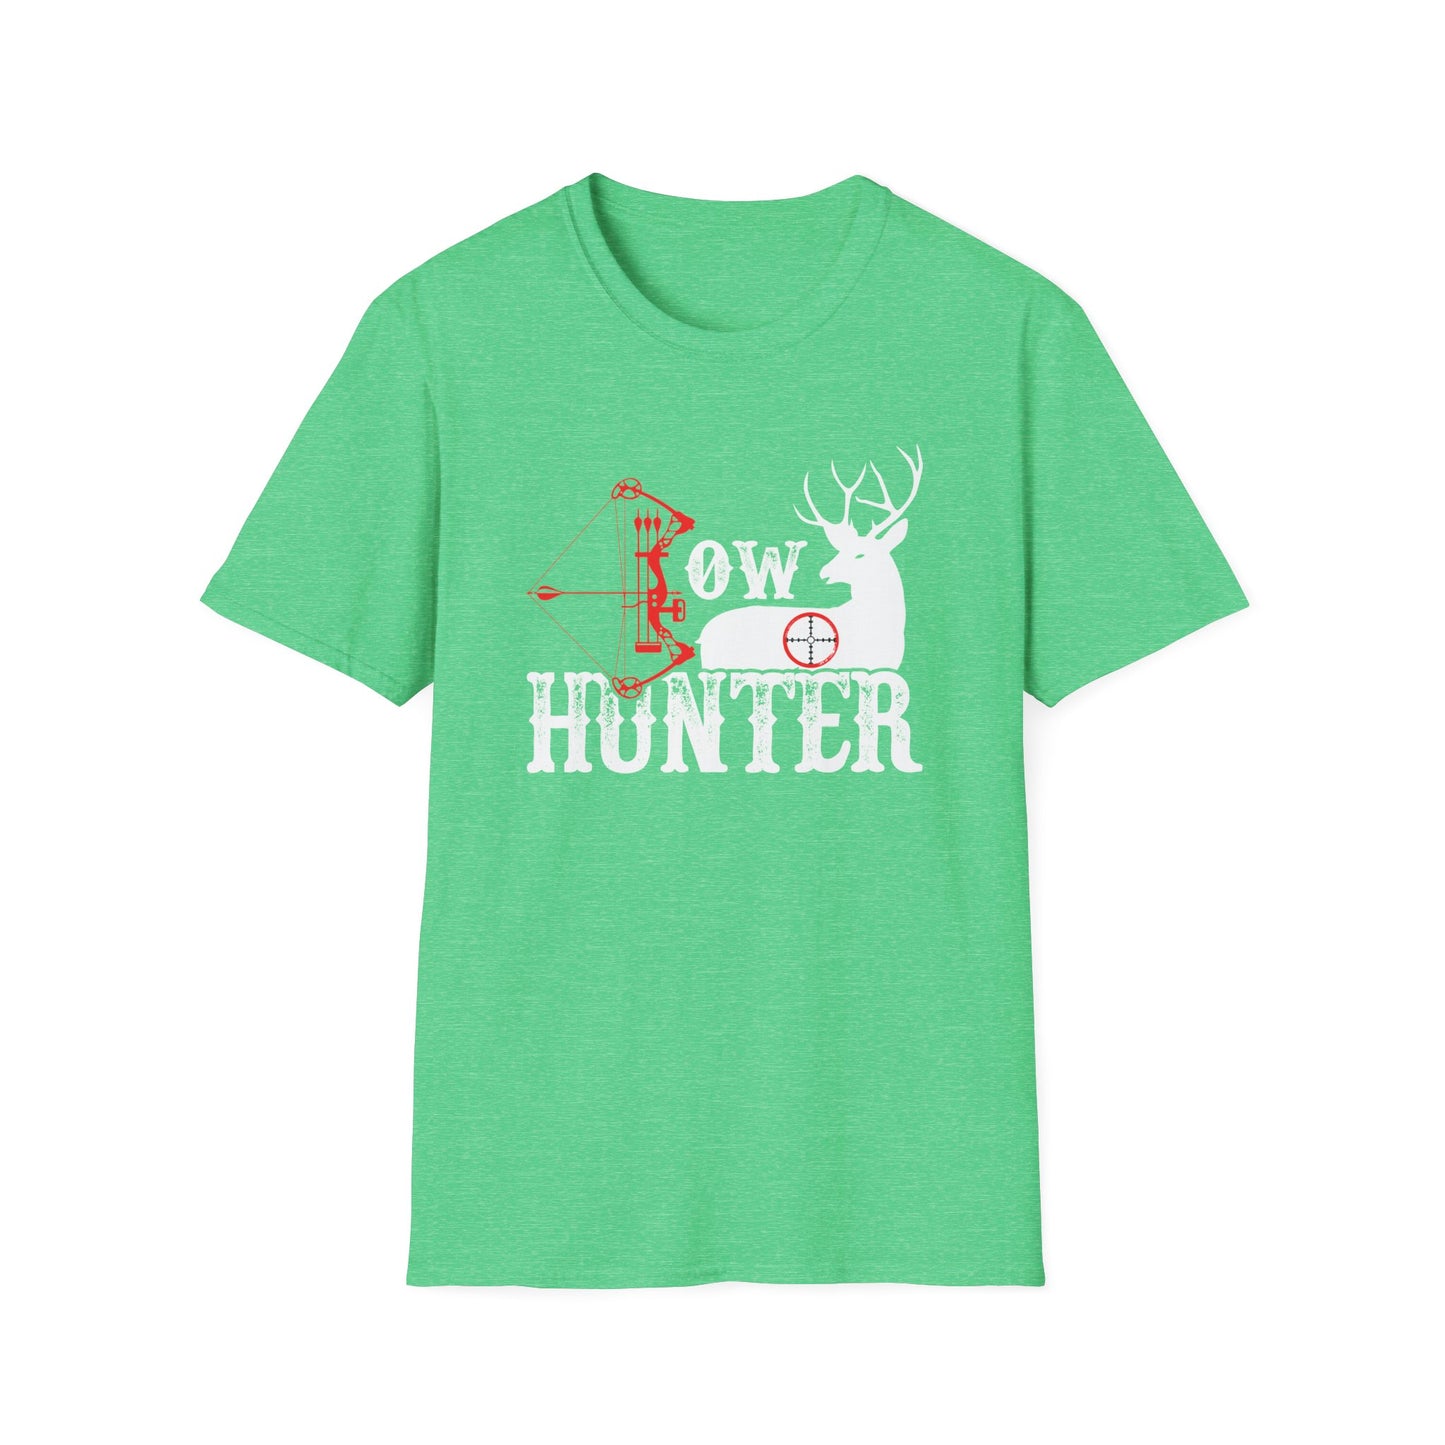 Unleash Your Inner Archer with Our Bow Hunter T-Shirts - Gear Up for Adventure!